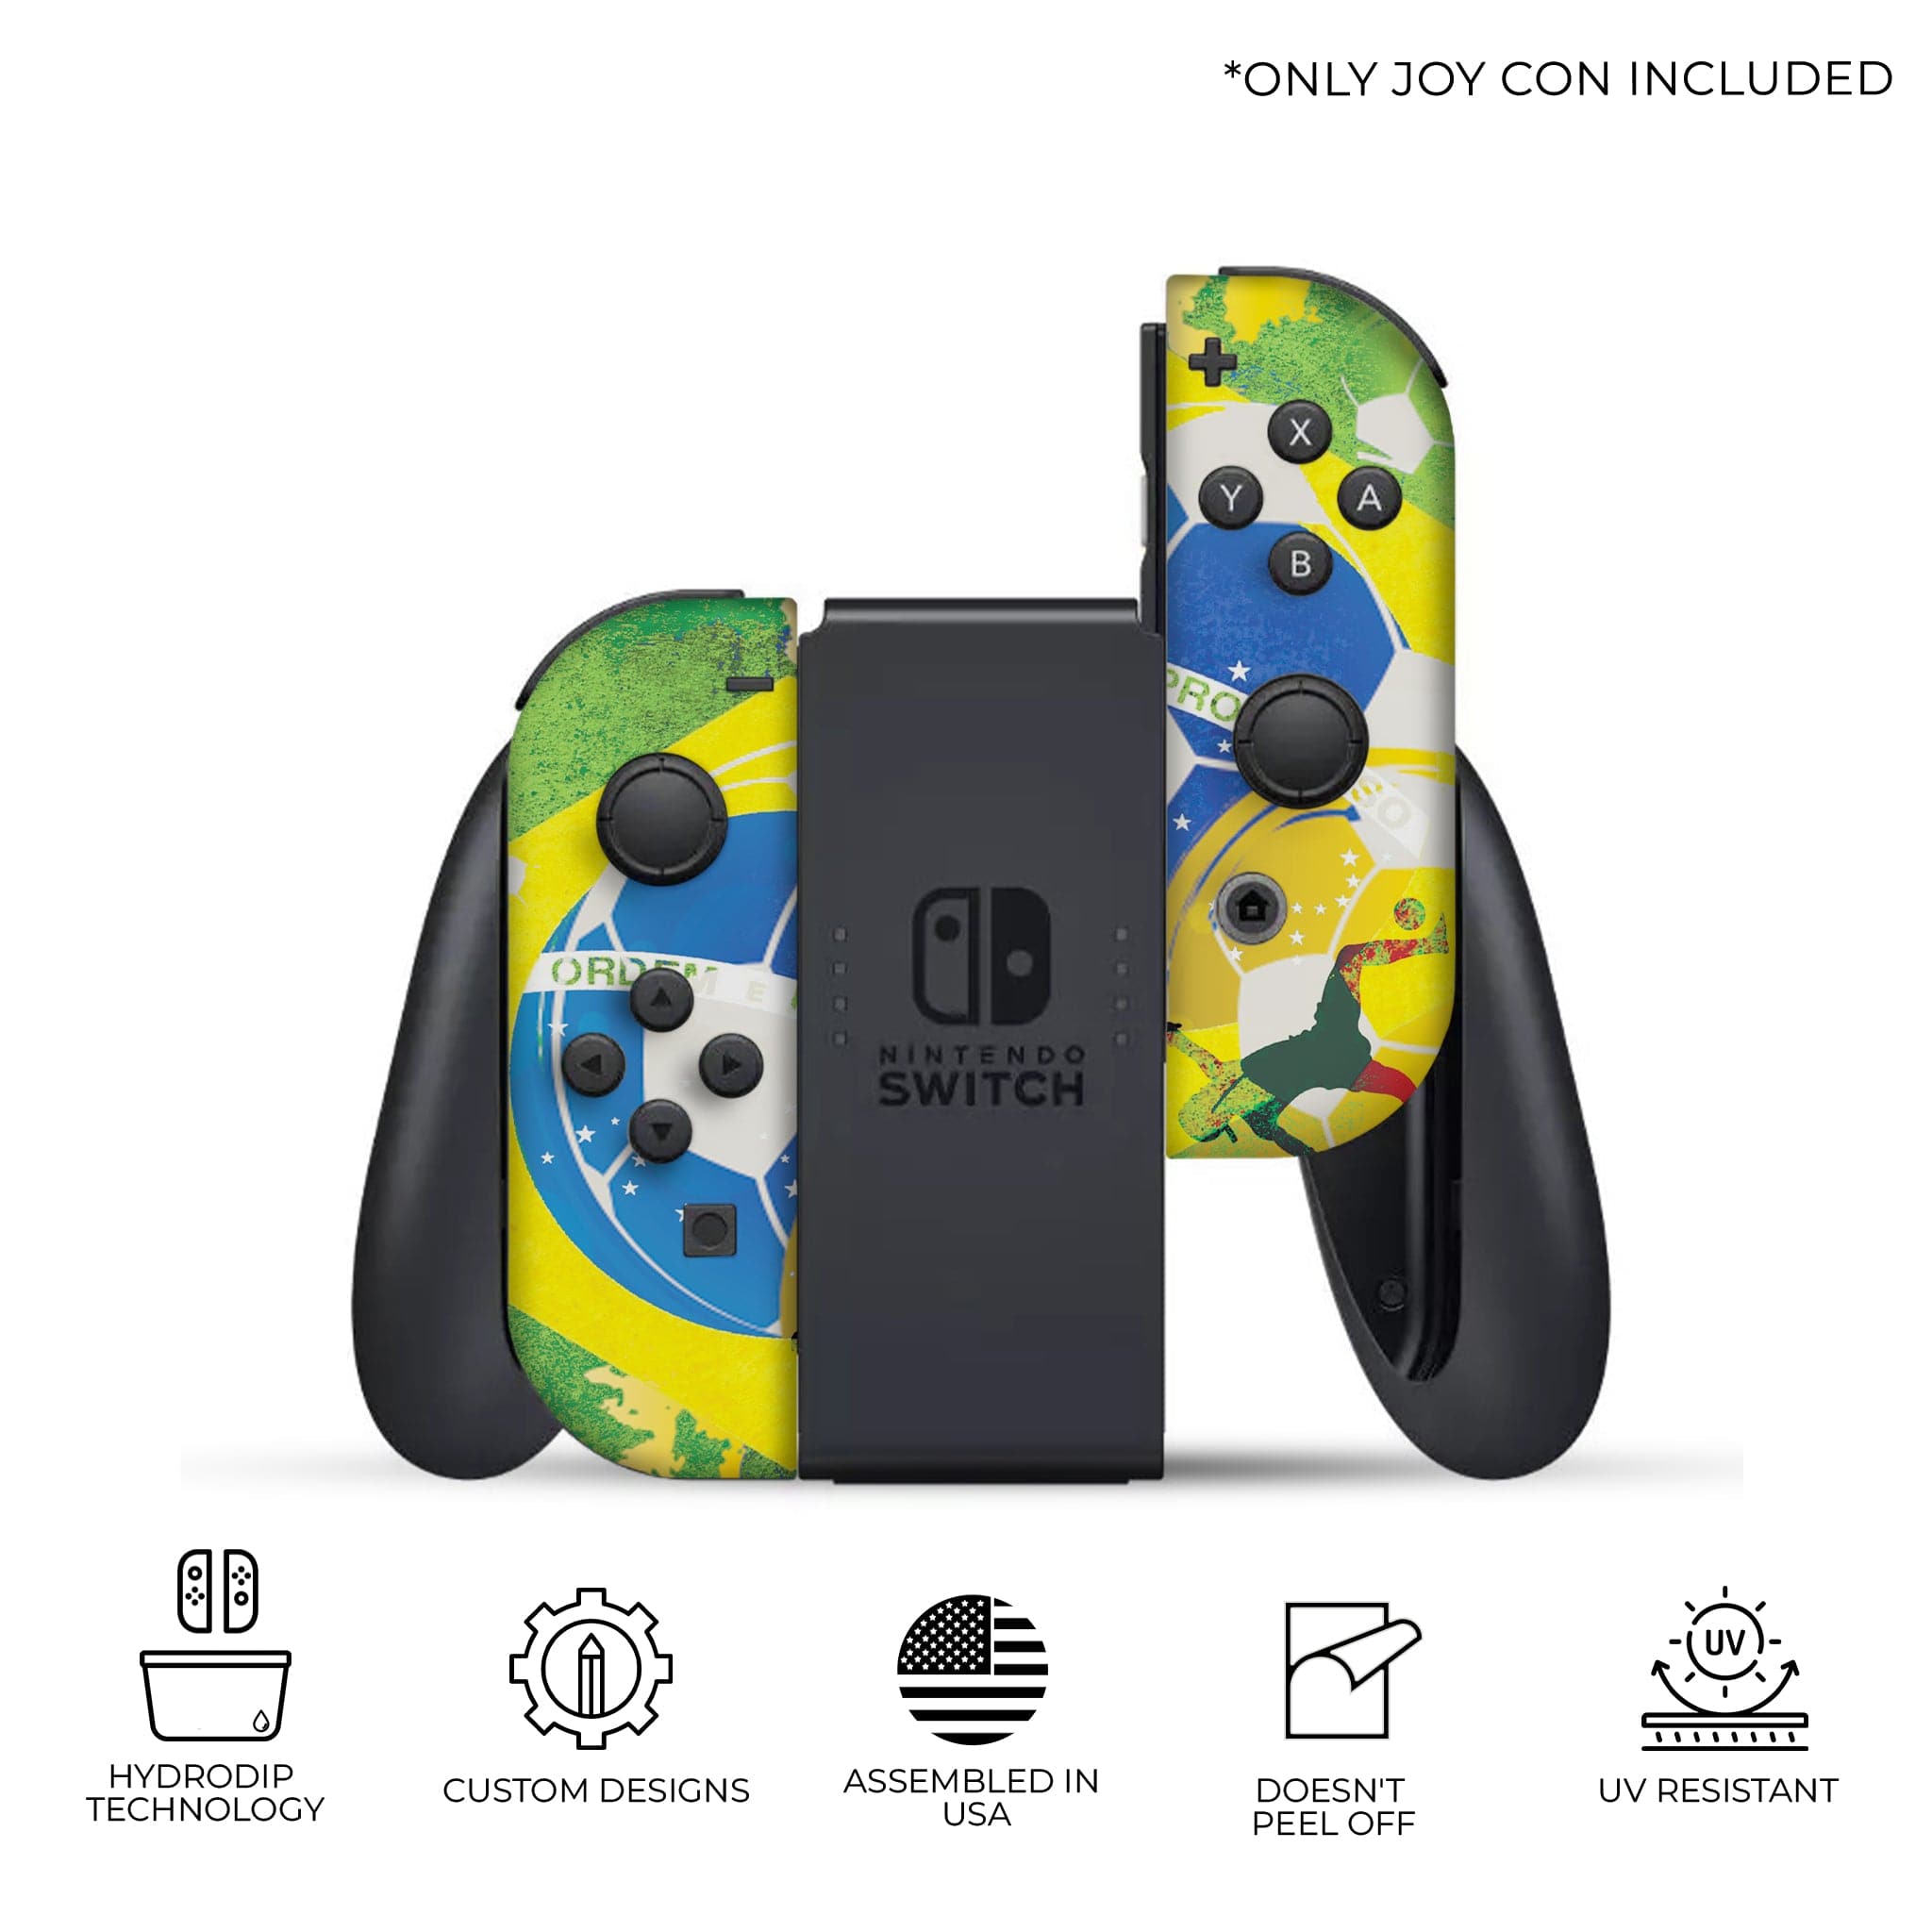 Brazil Inspired Nintendo Switch Joy-Con Left and Right Switch Controllers by Nintendo